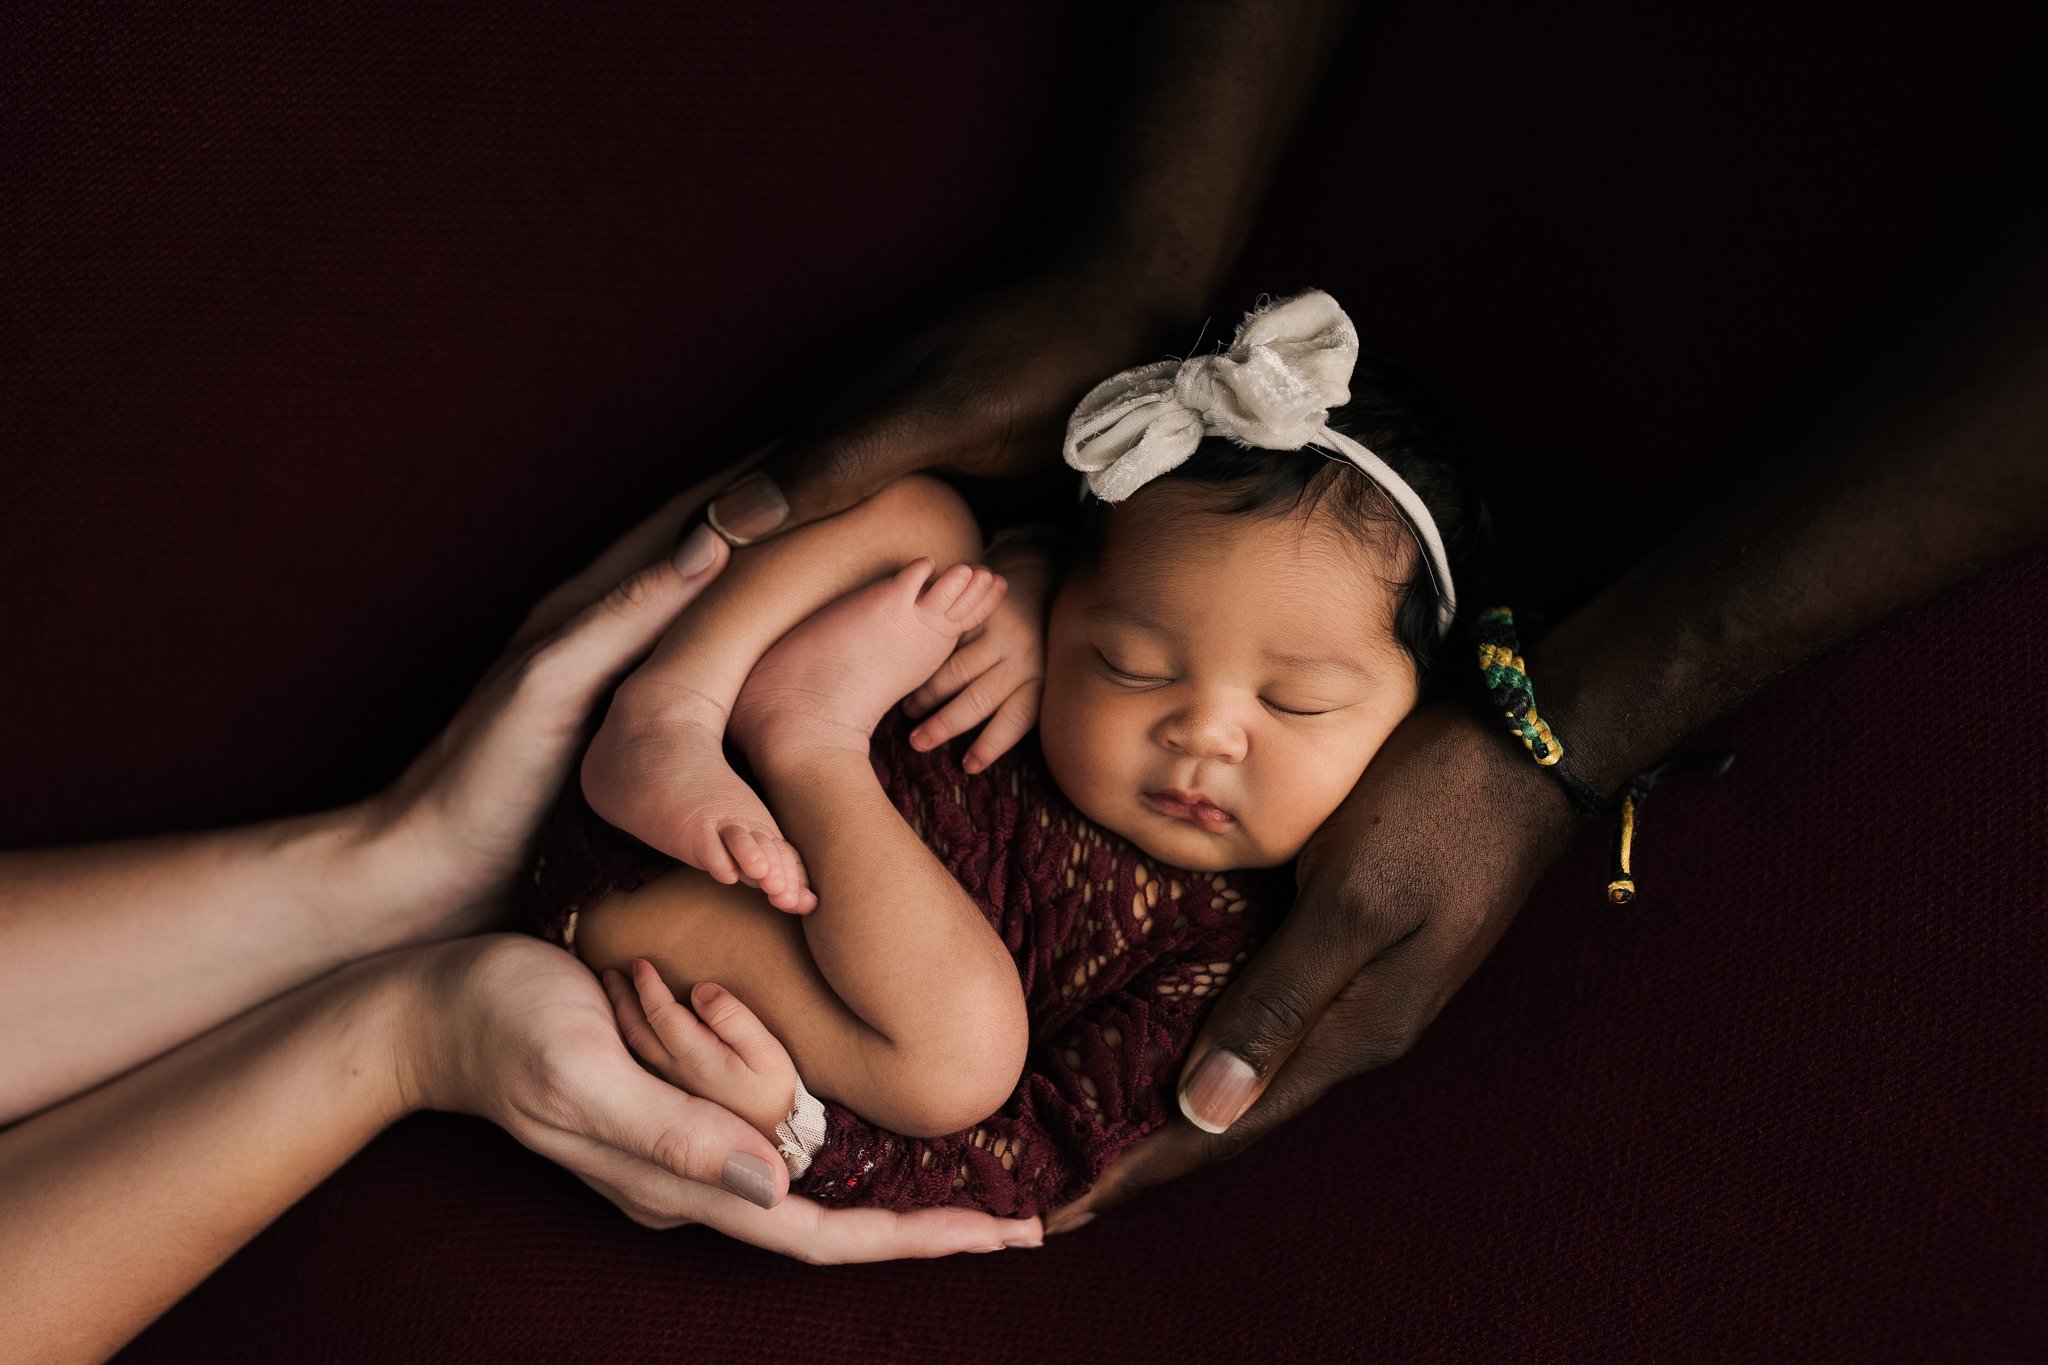 Nashville_Tennessee_Newborn_Photographer_Baby_Girl_Olive_Green_Burgundy_Studio_at_Home_Travel_Posed_Session_by_Nebworn_Photographer_Christie_Leigh_Photo_in_Ohio-25.jpg